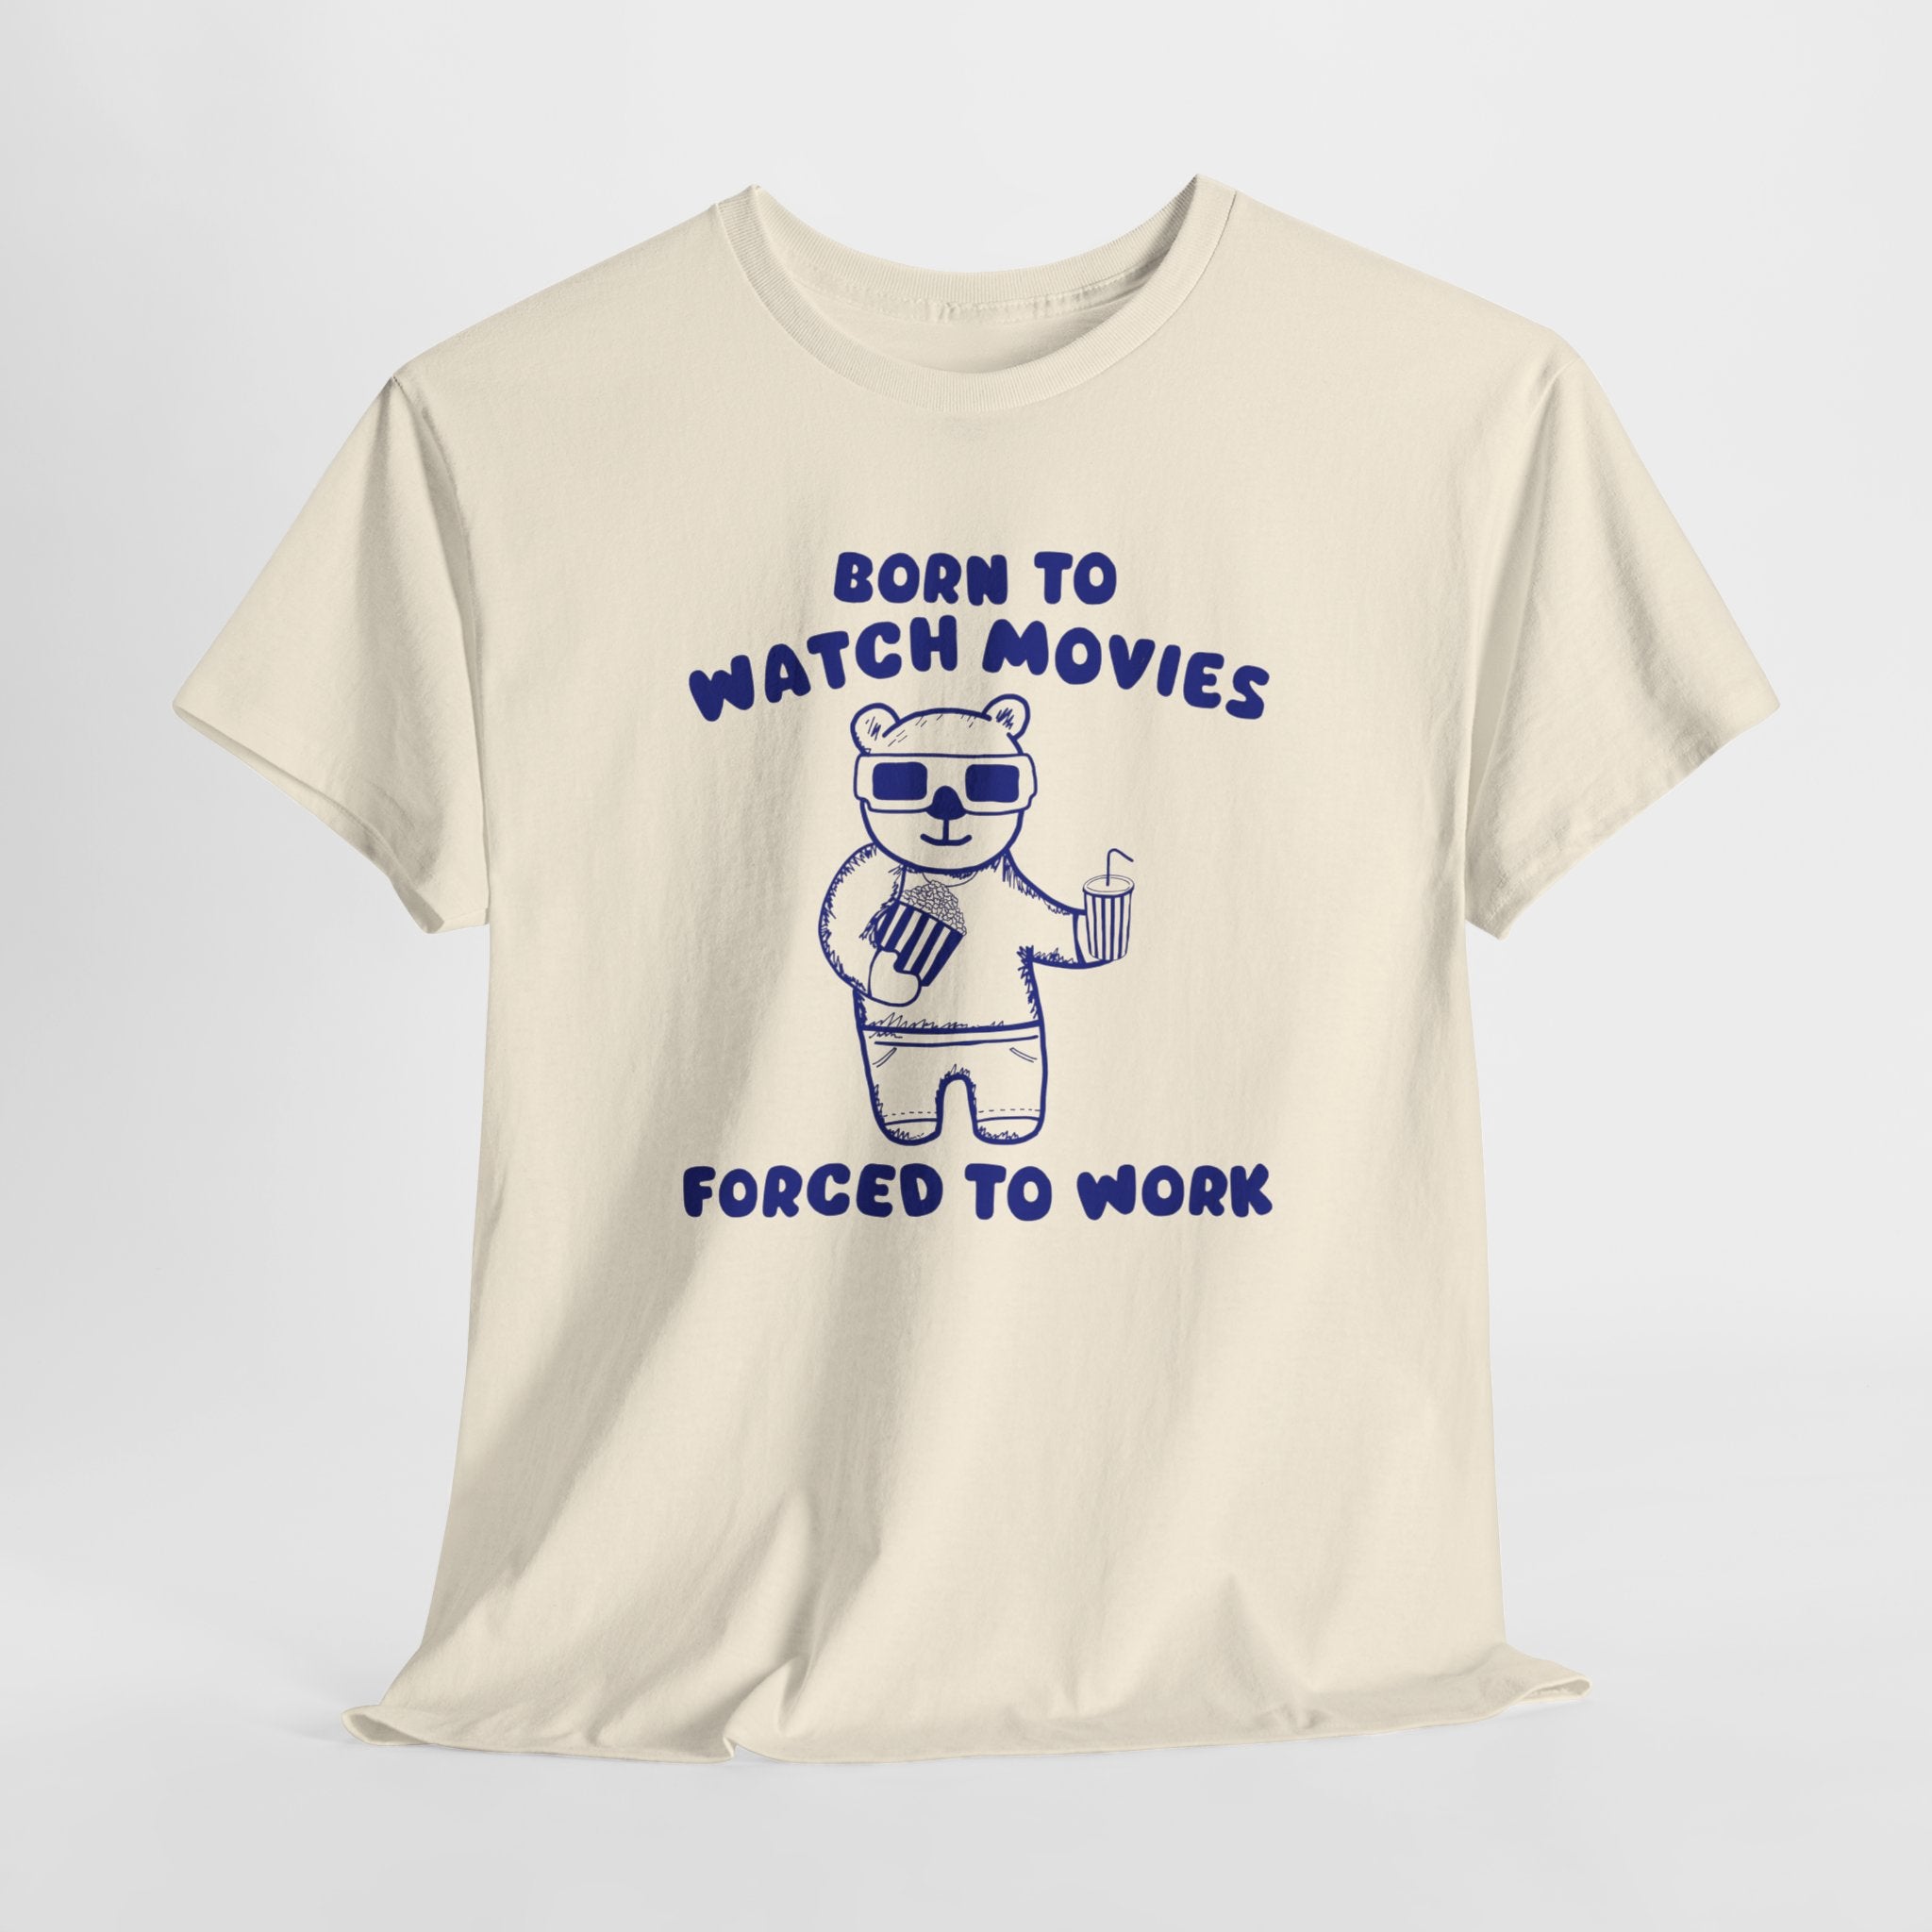 Born to Watch Movies Forced to Work Shirt